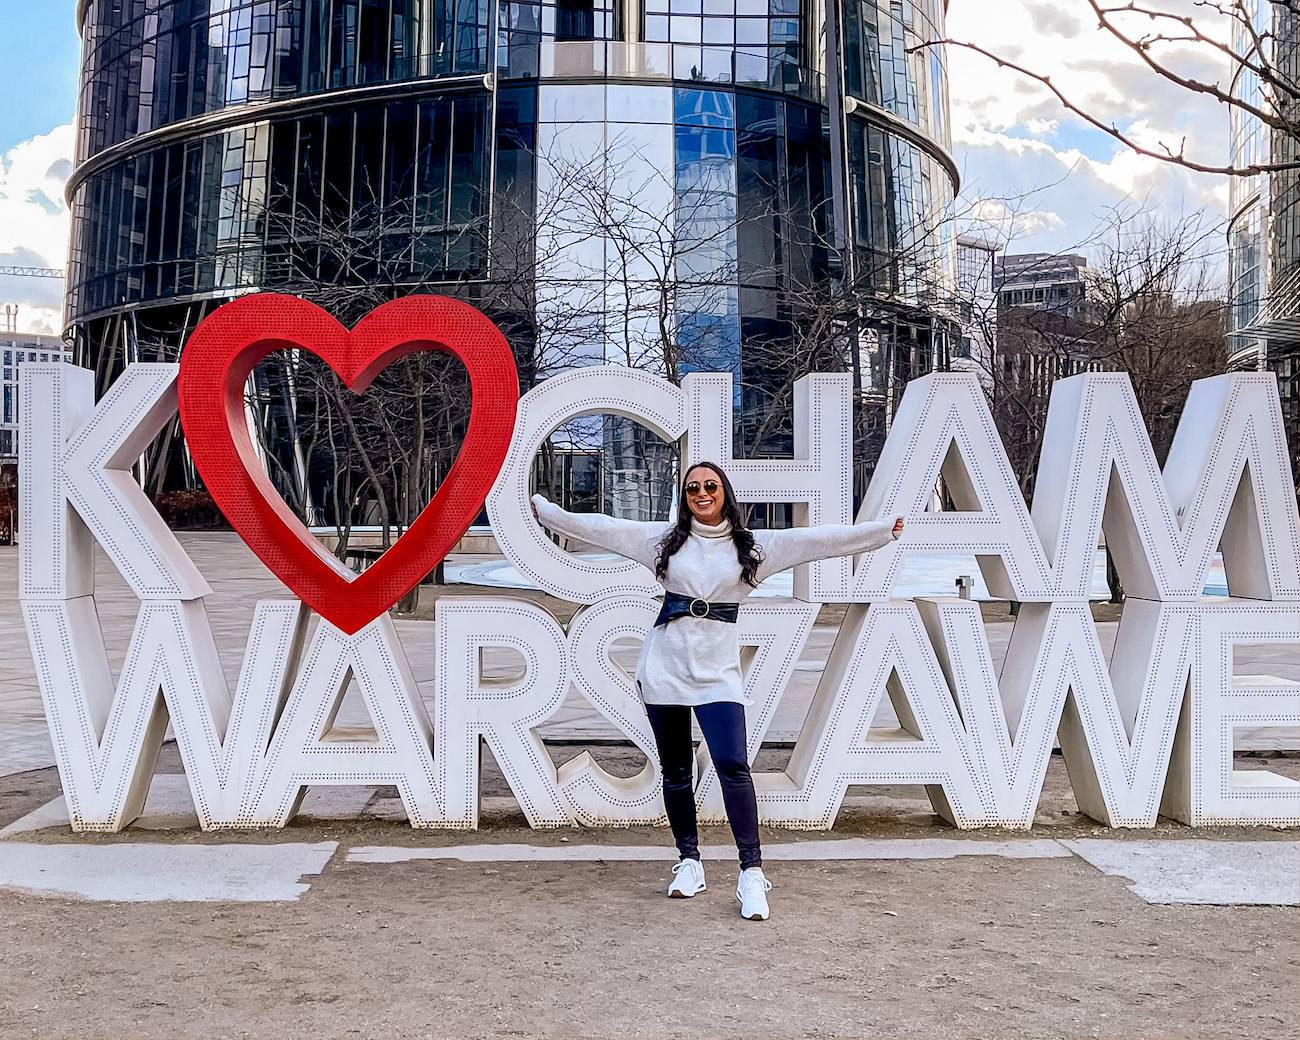 How to Spend Two Days in Warsaw